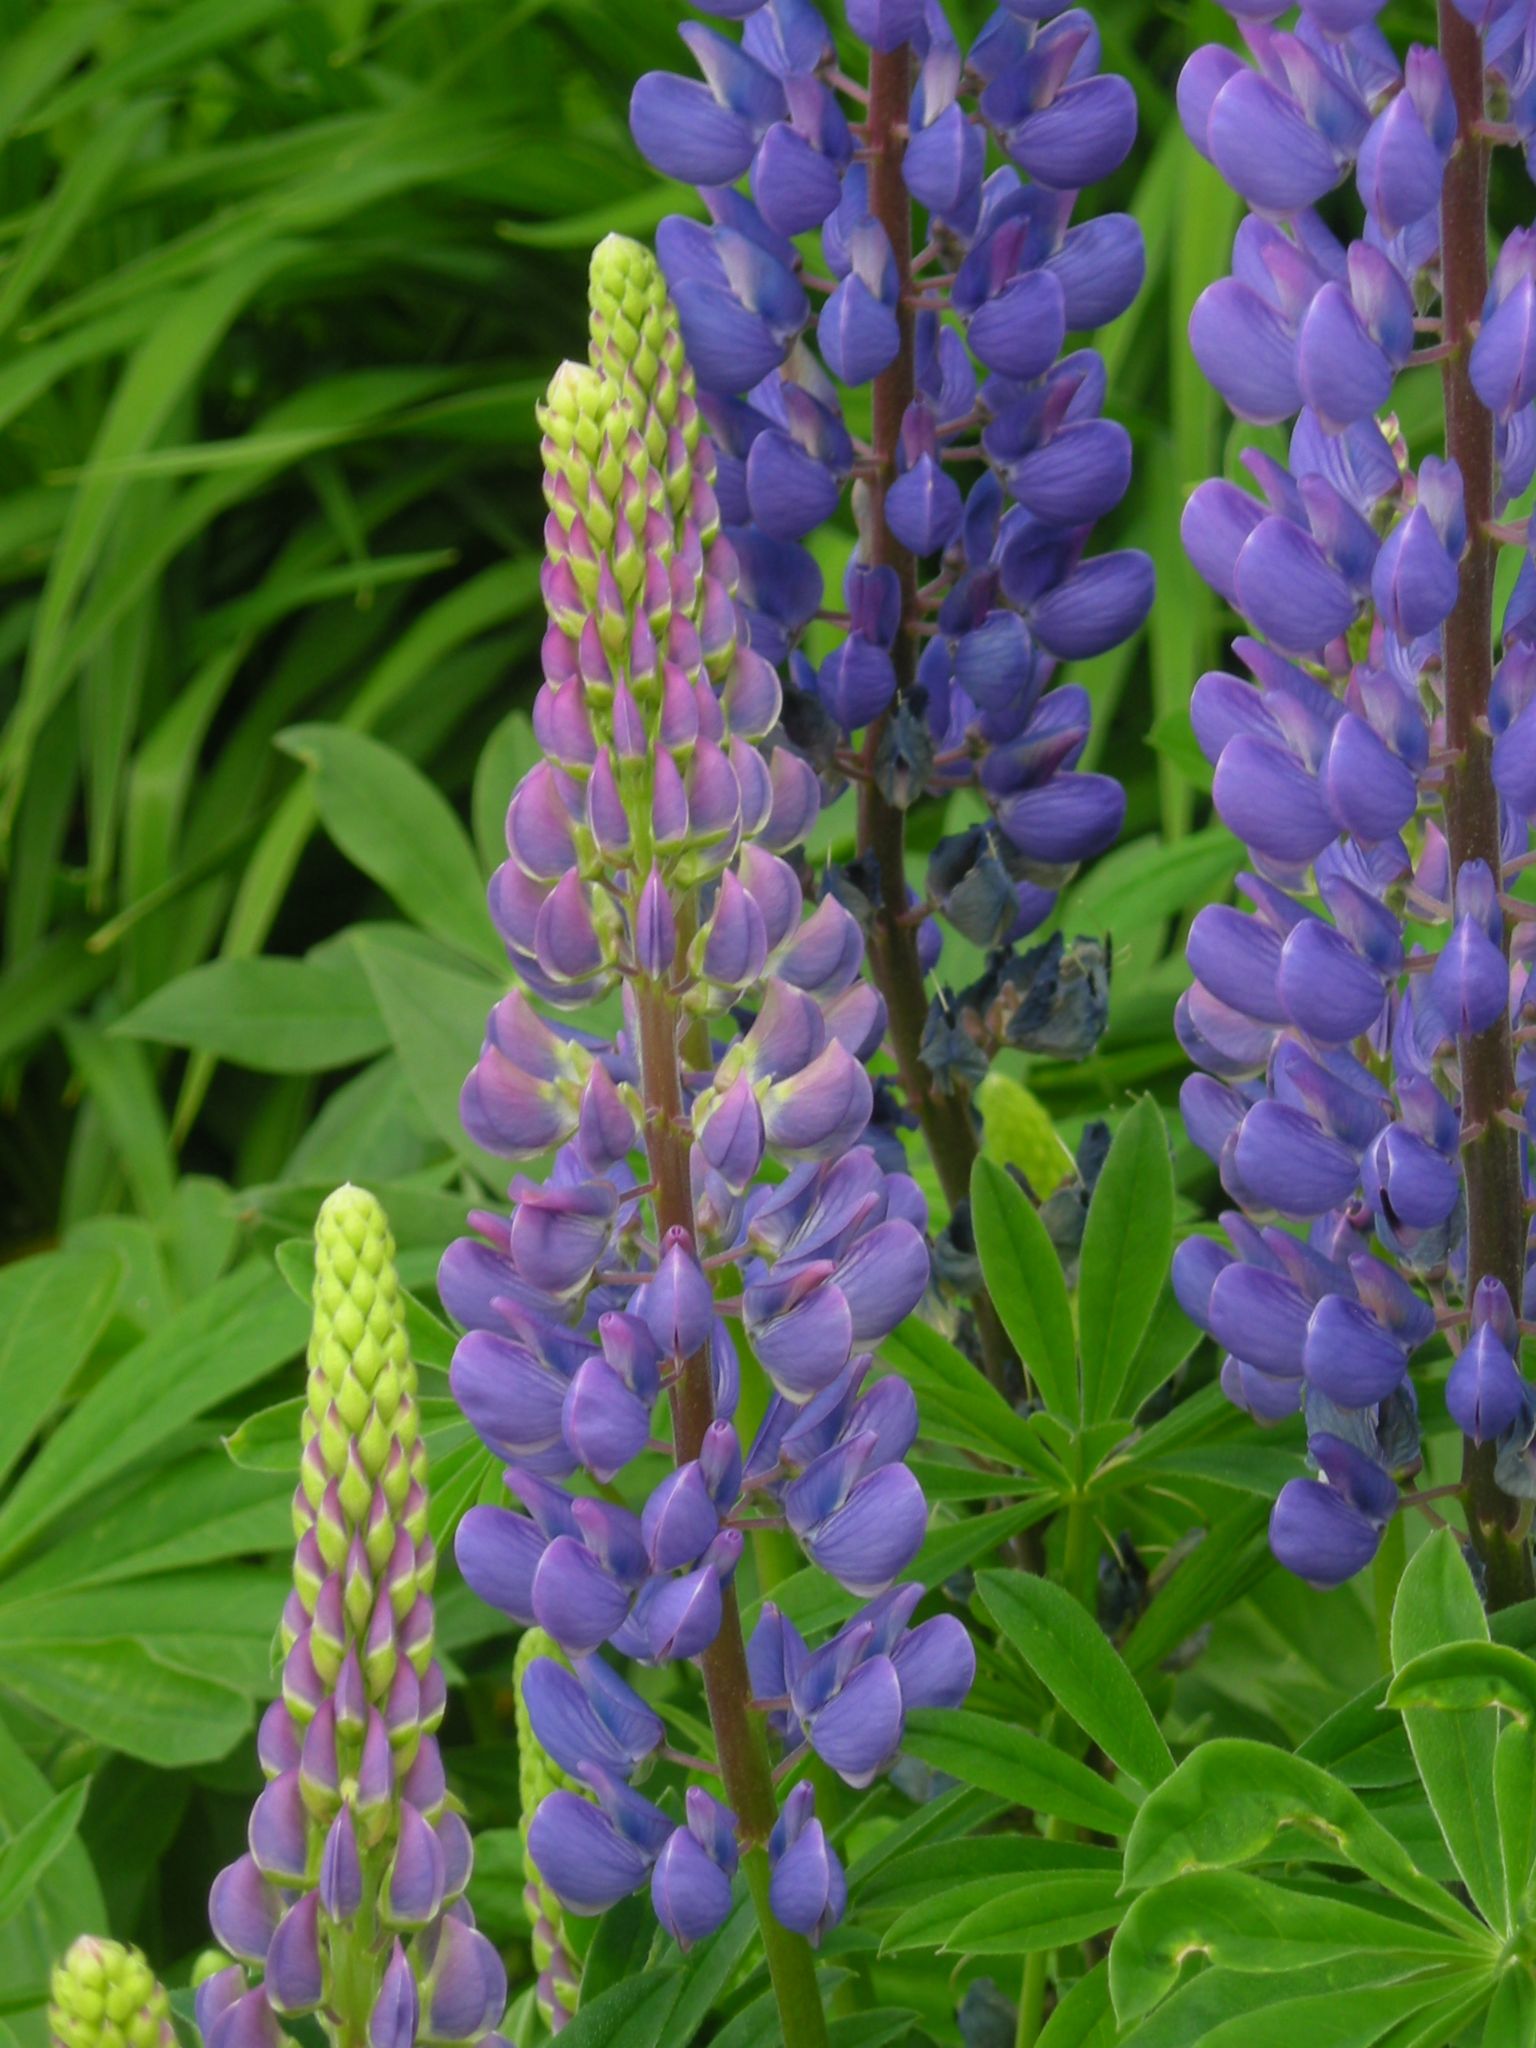 How To Plant Gorgeous Purple Perennial Flowers For Beginners